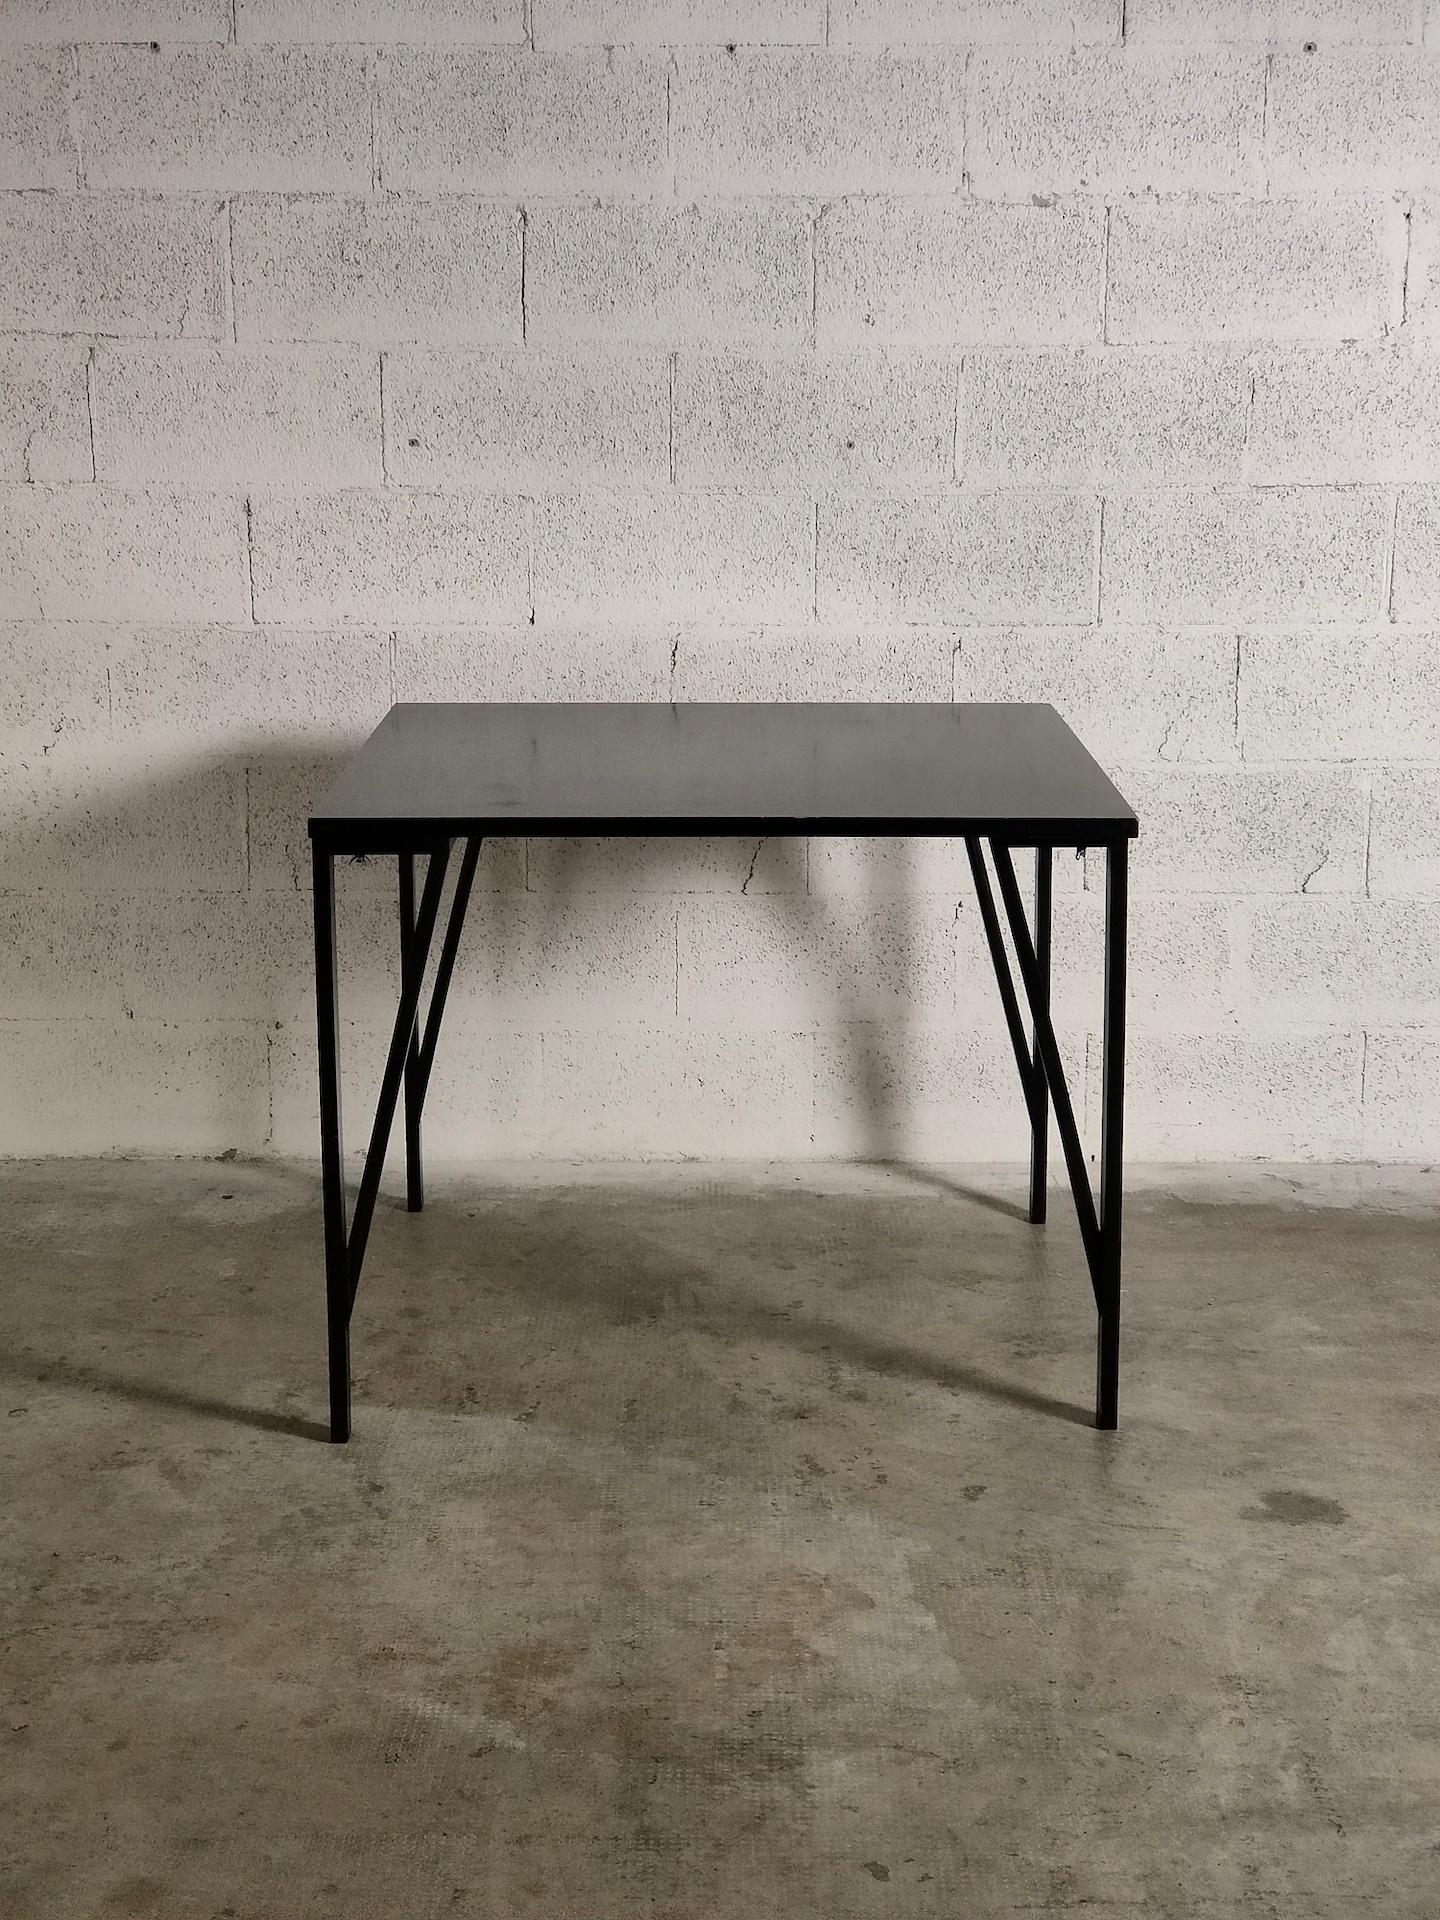 Achille Castiglioni with Trac re-enacts the notion of folding table, experimenting with his workhorse: the redesign of anonymous objects that have survived use and time and can be enhanced with minimal modifications. With a modernity that is ahead